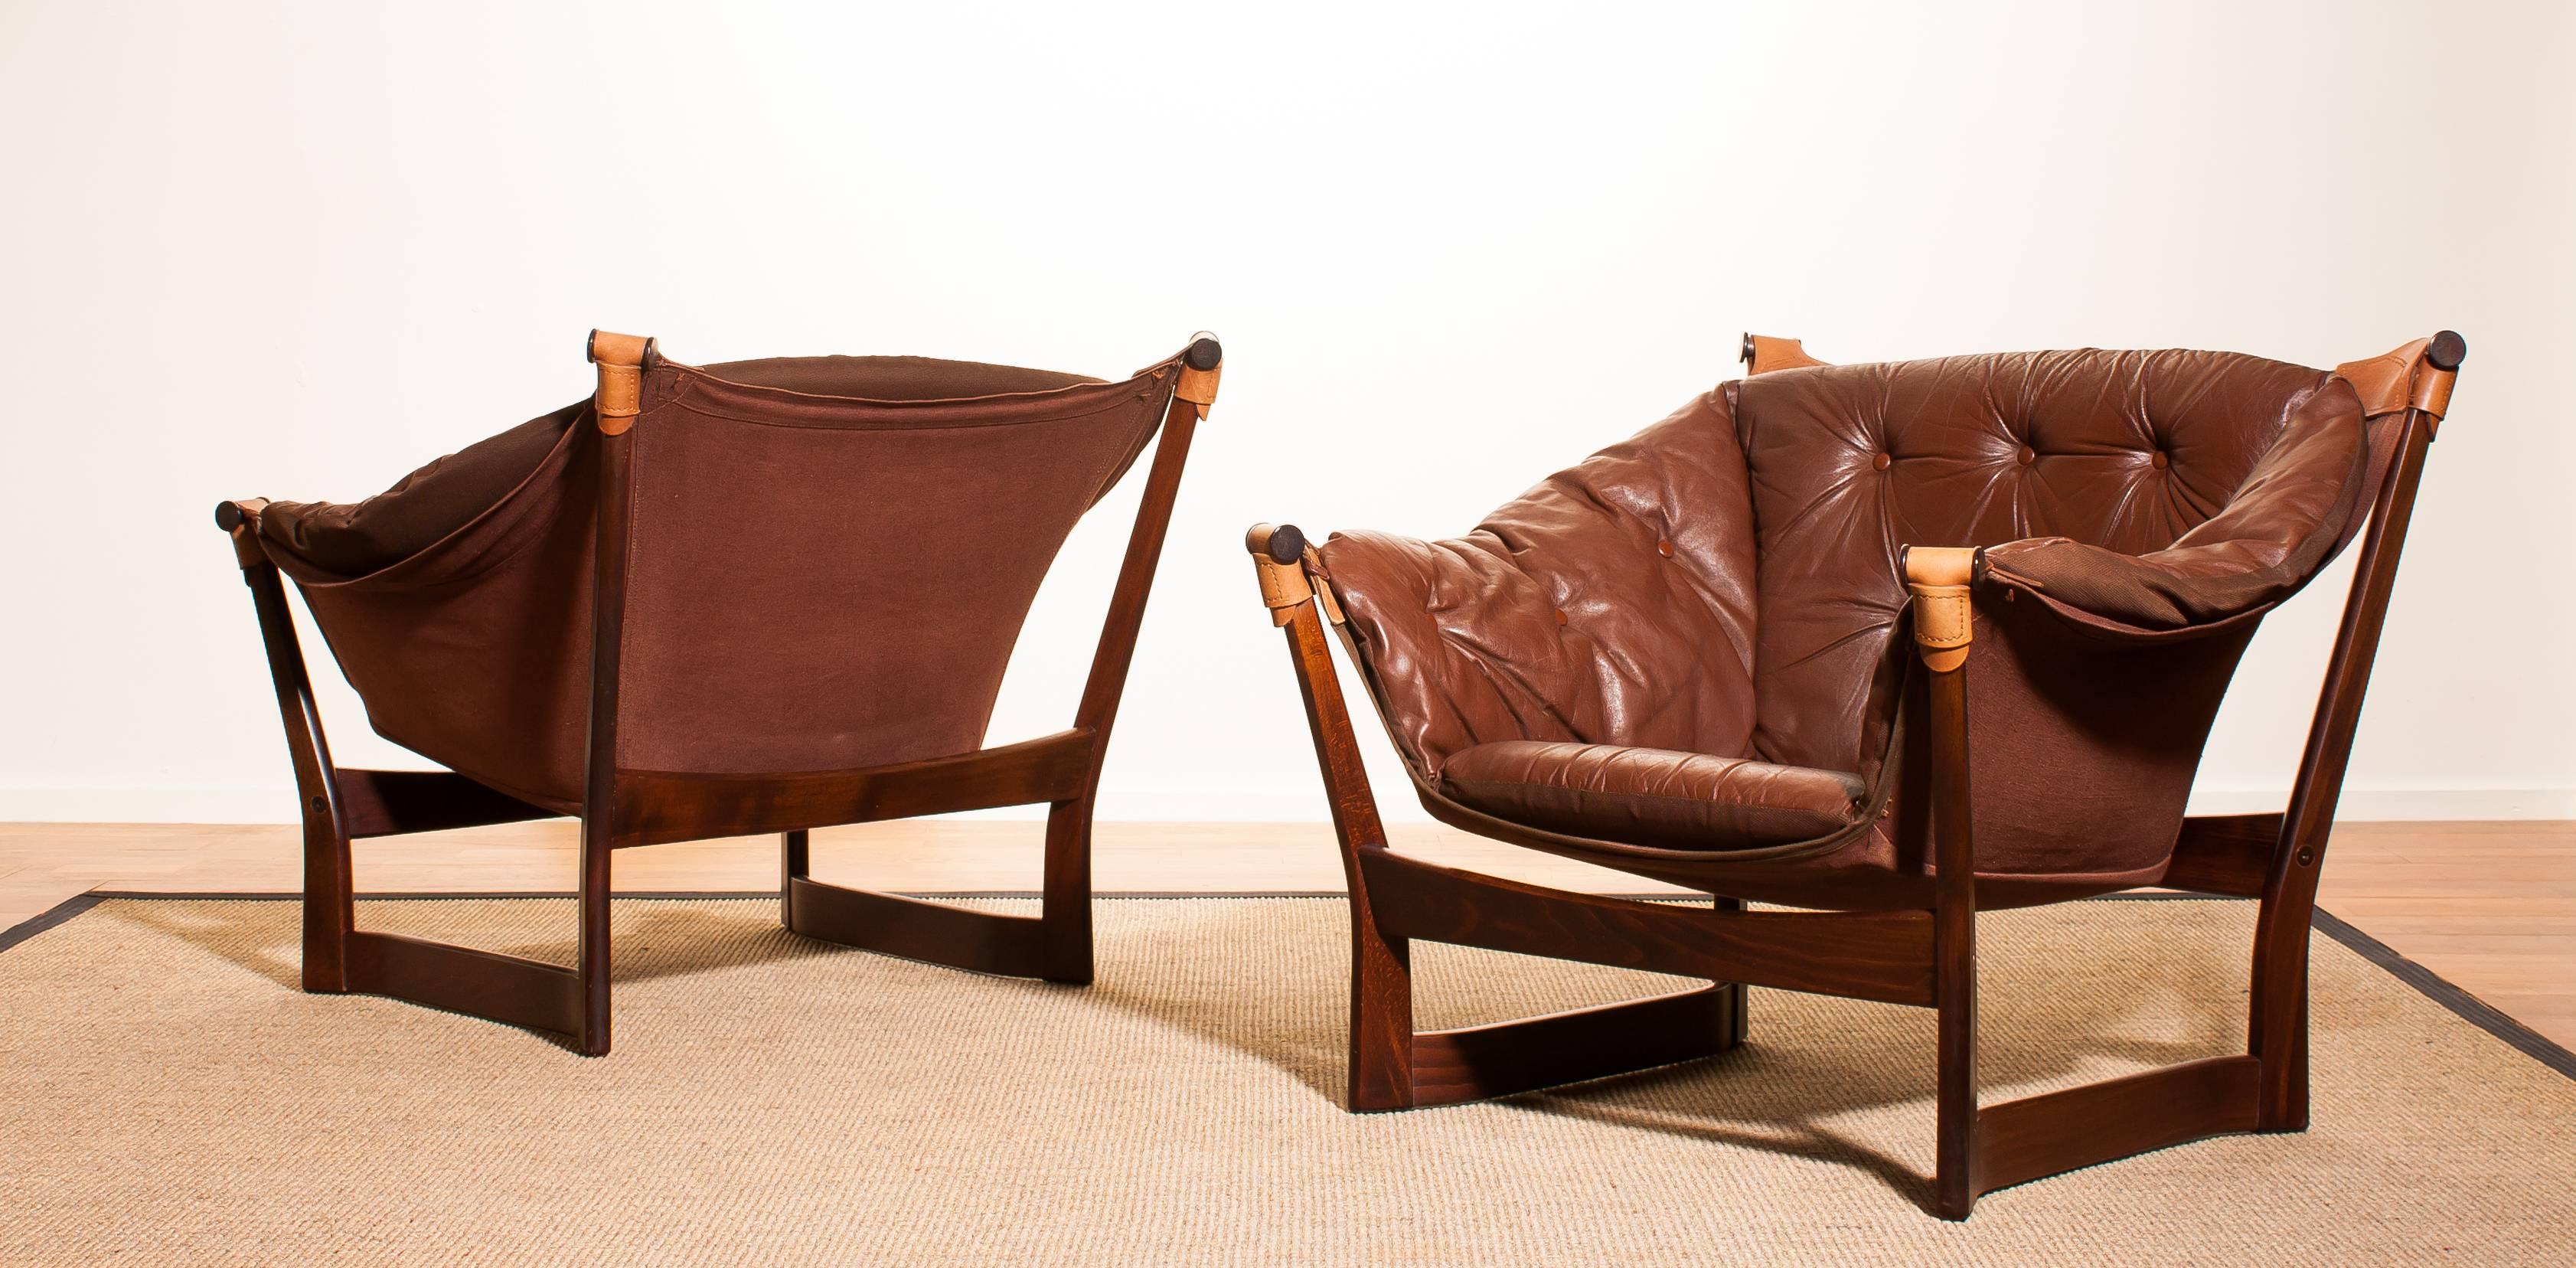 1950s, Teak and Leather Pair 'Trega' Chairs by Tormod Alnaes for Sørliemøbler 3